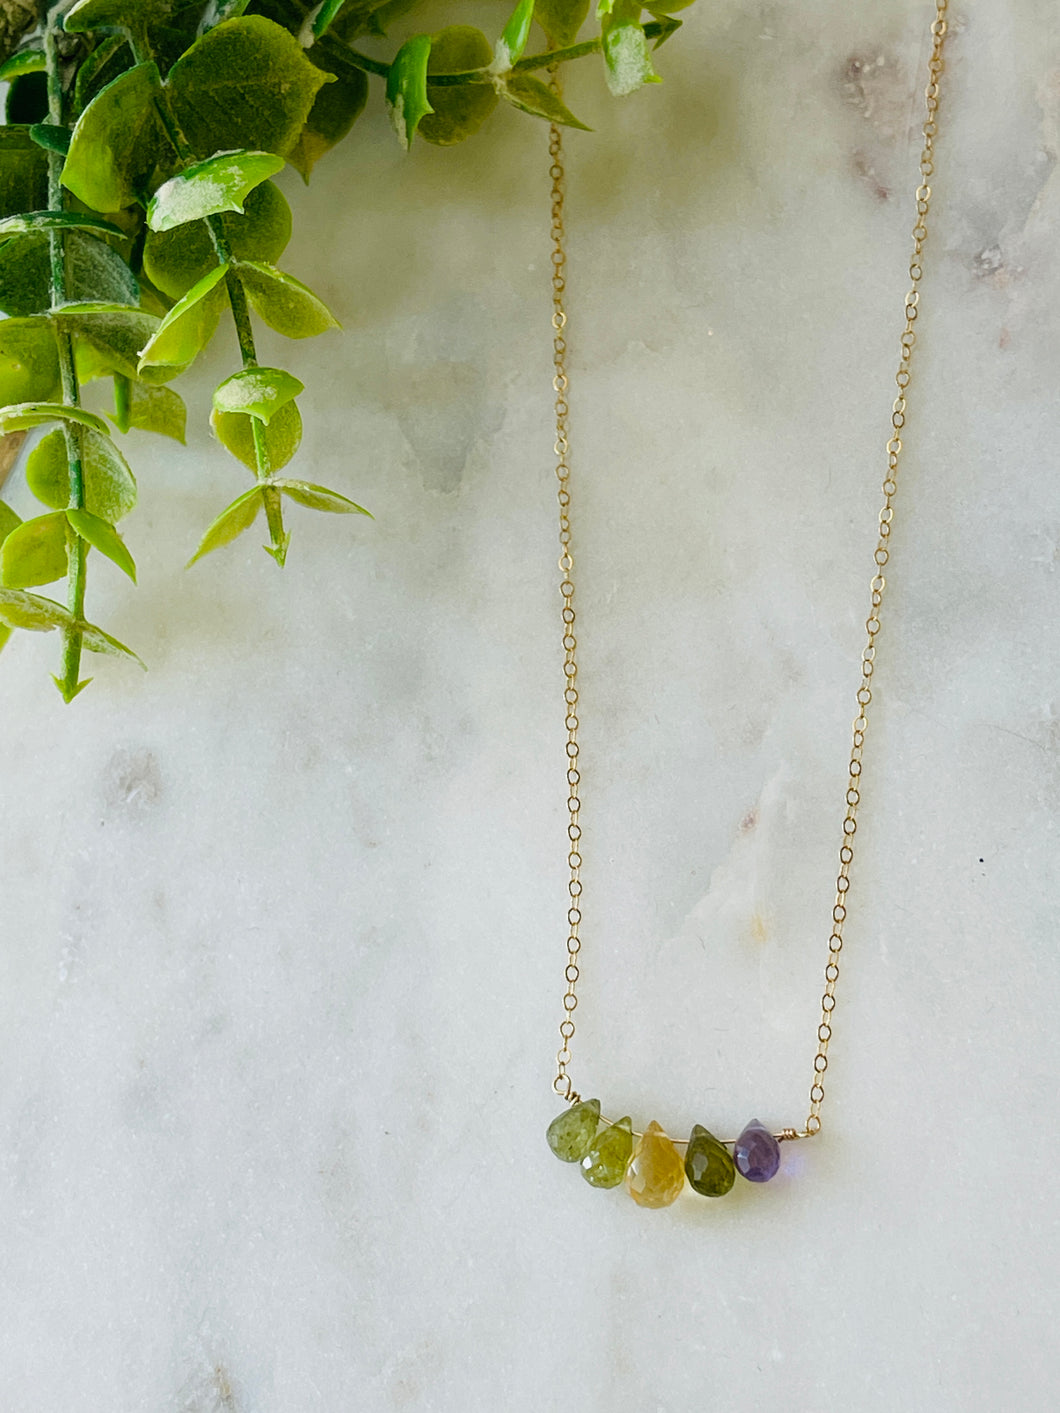 Green and purple necklace